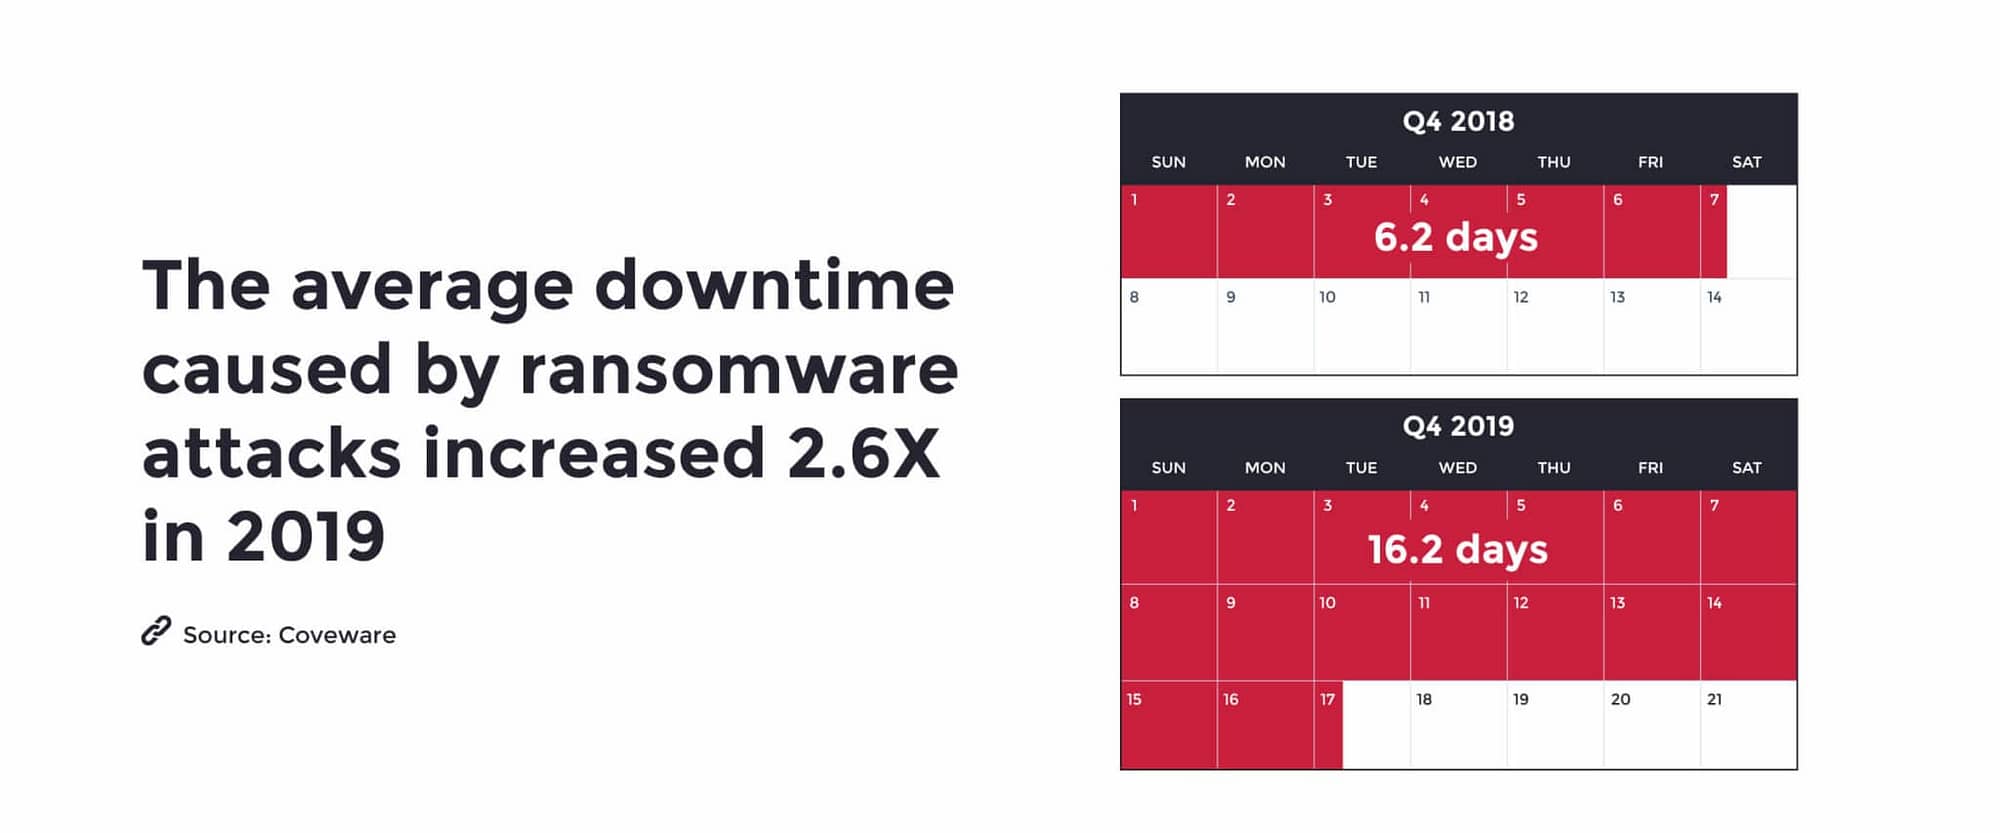 ransomware downtime statistic 2019